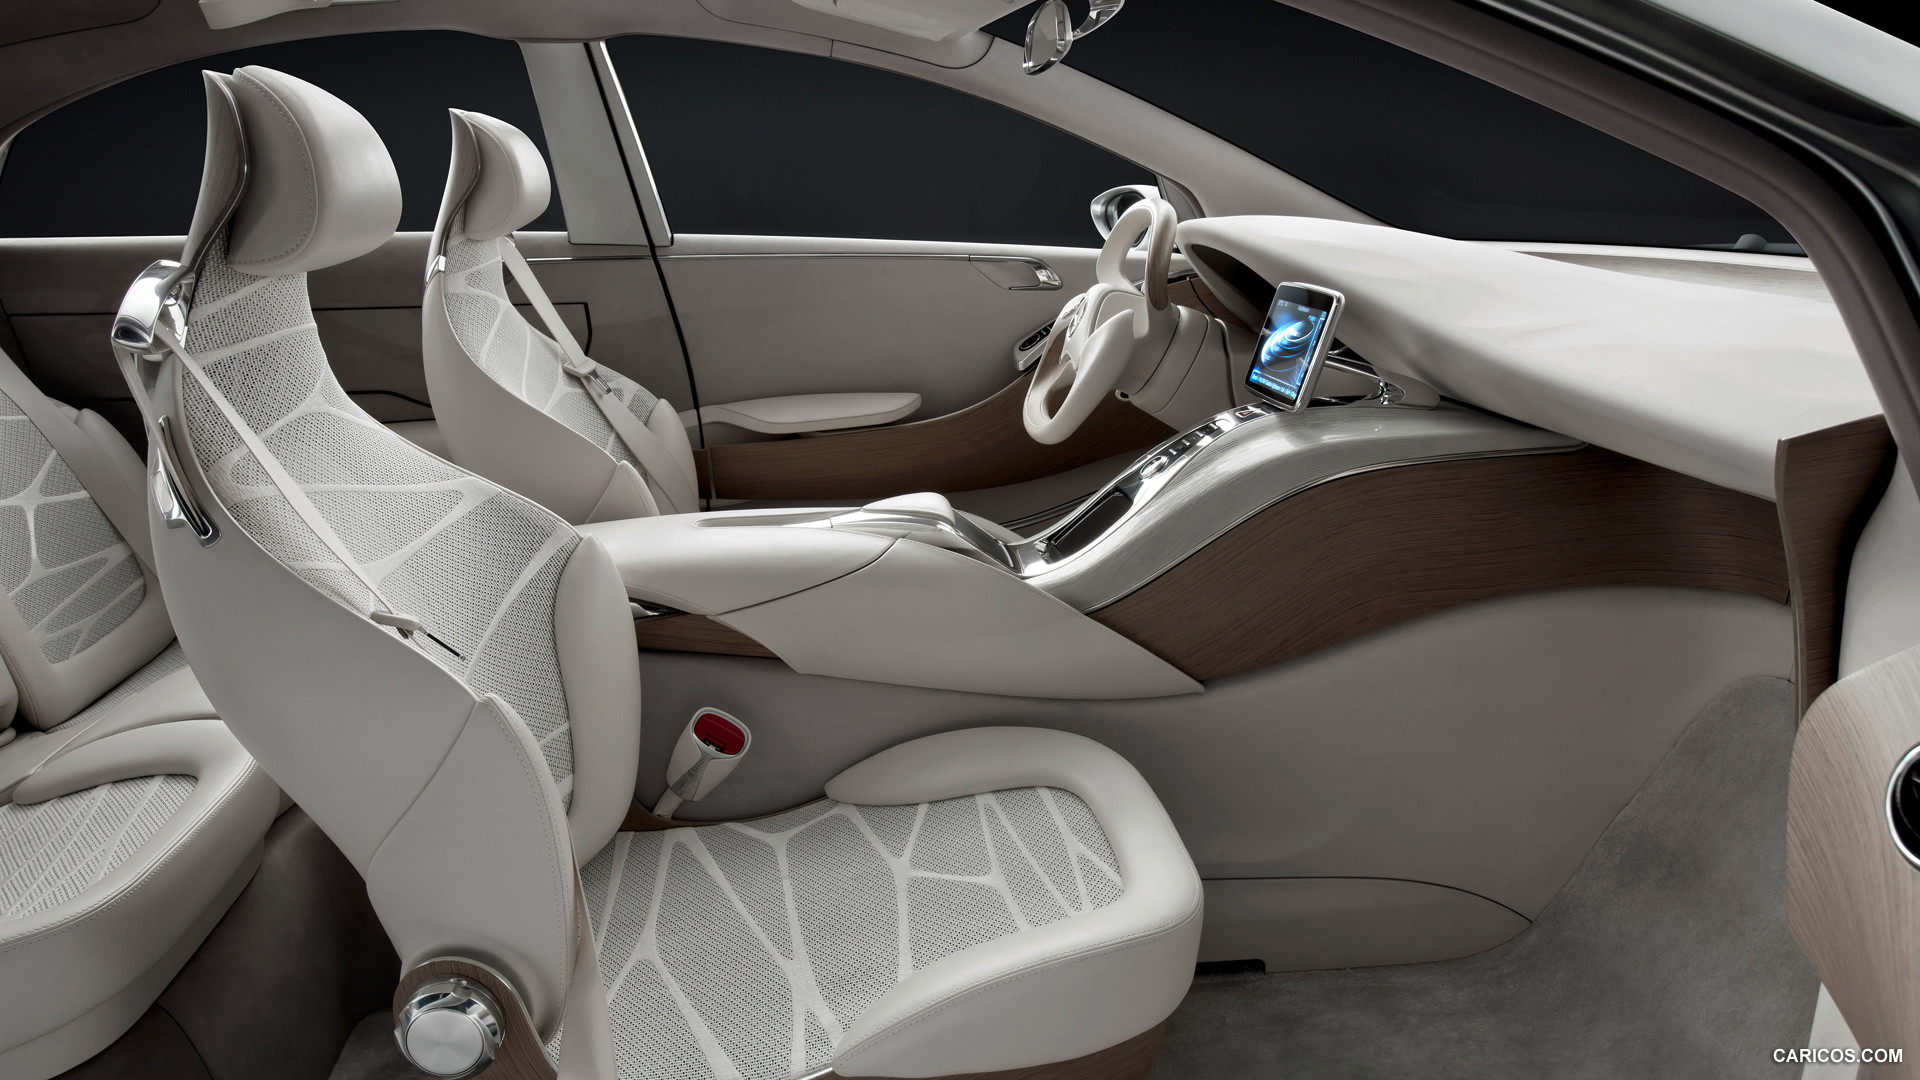 Mercedes-Benz F800 Style Concept (2010)  - Interior, Front Seats, #57 of 120